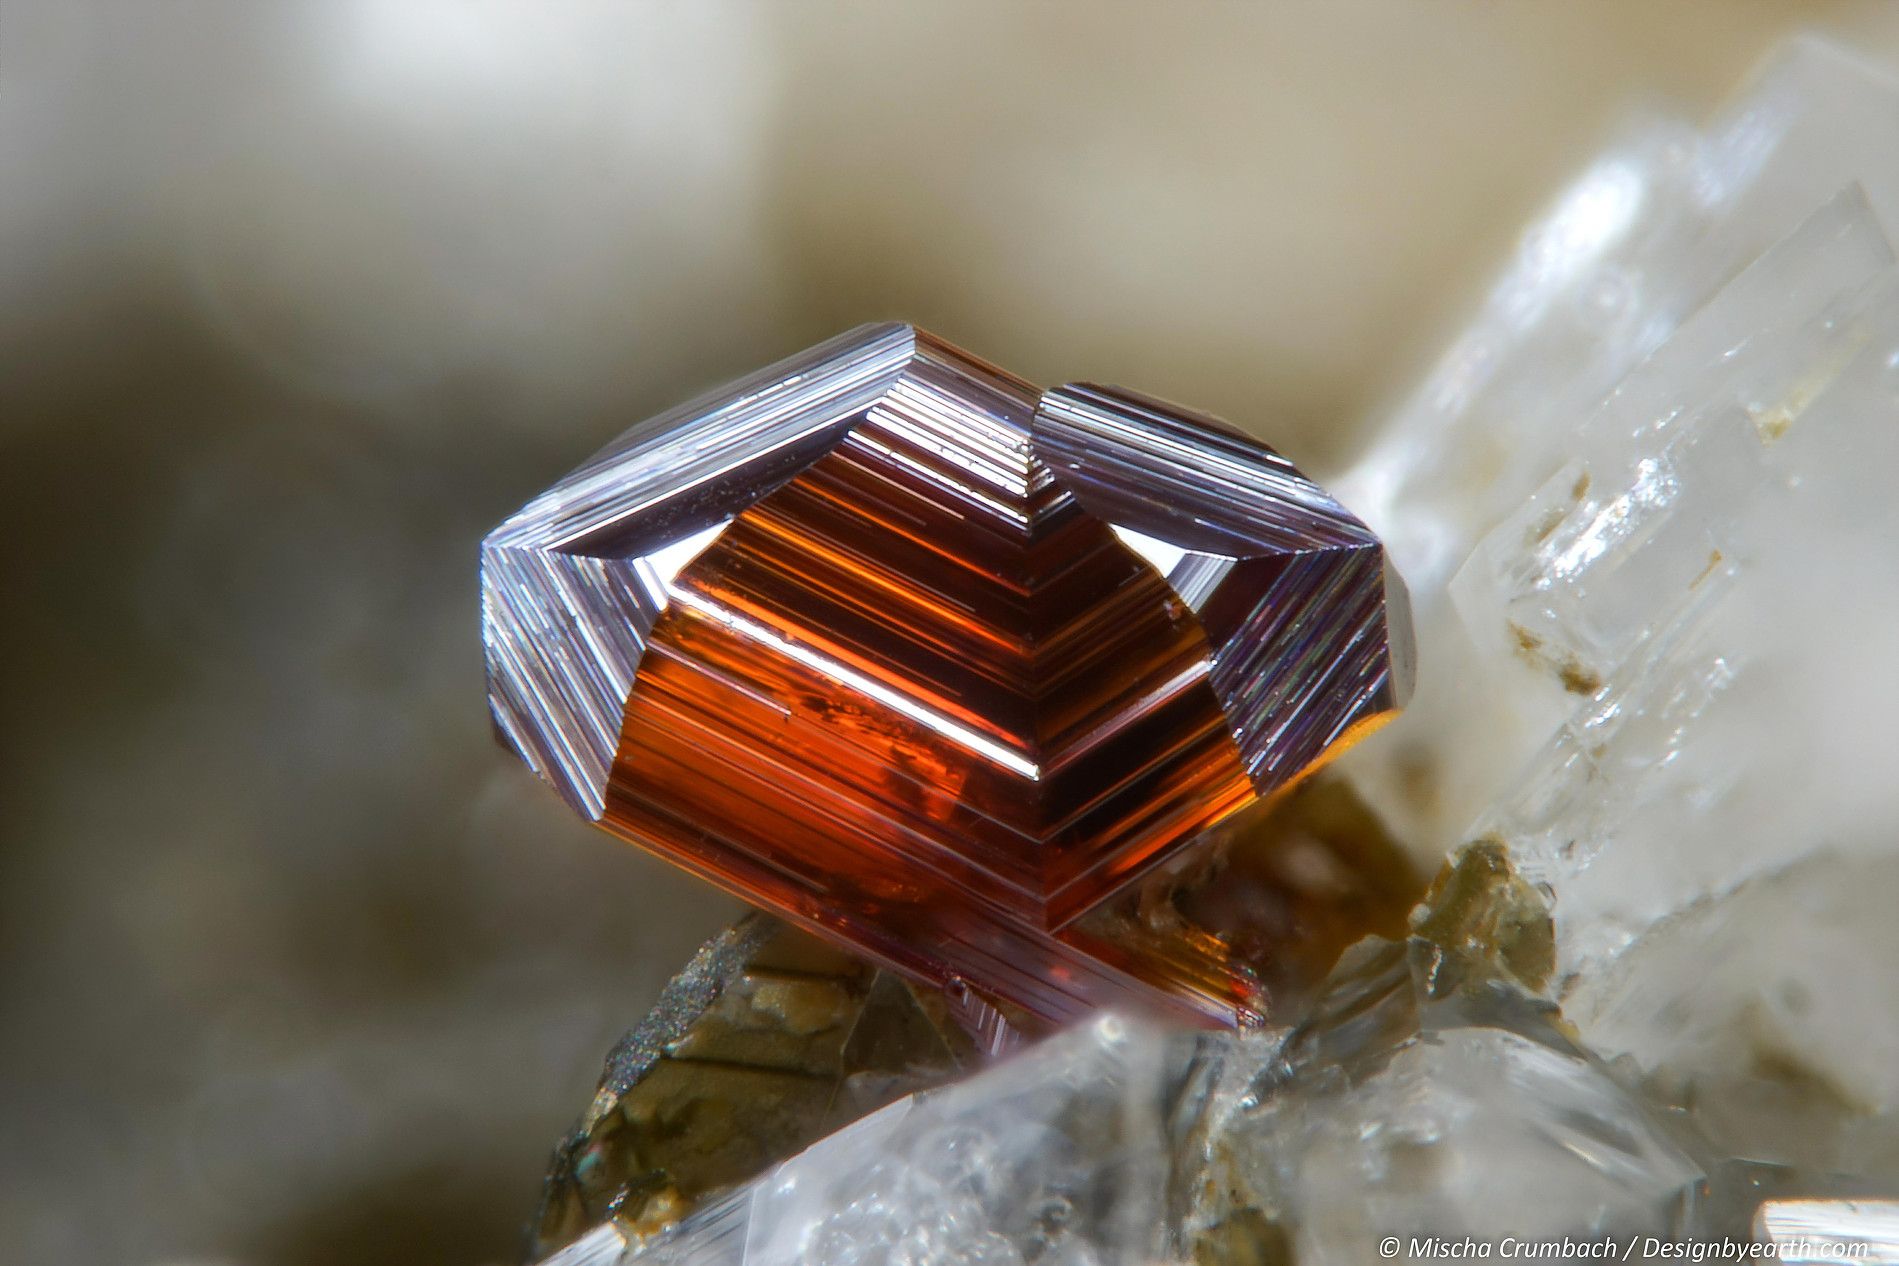 Rutile Market: Growth Opportunities and Key Trends for 2020-2025